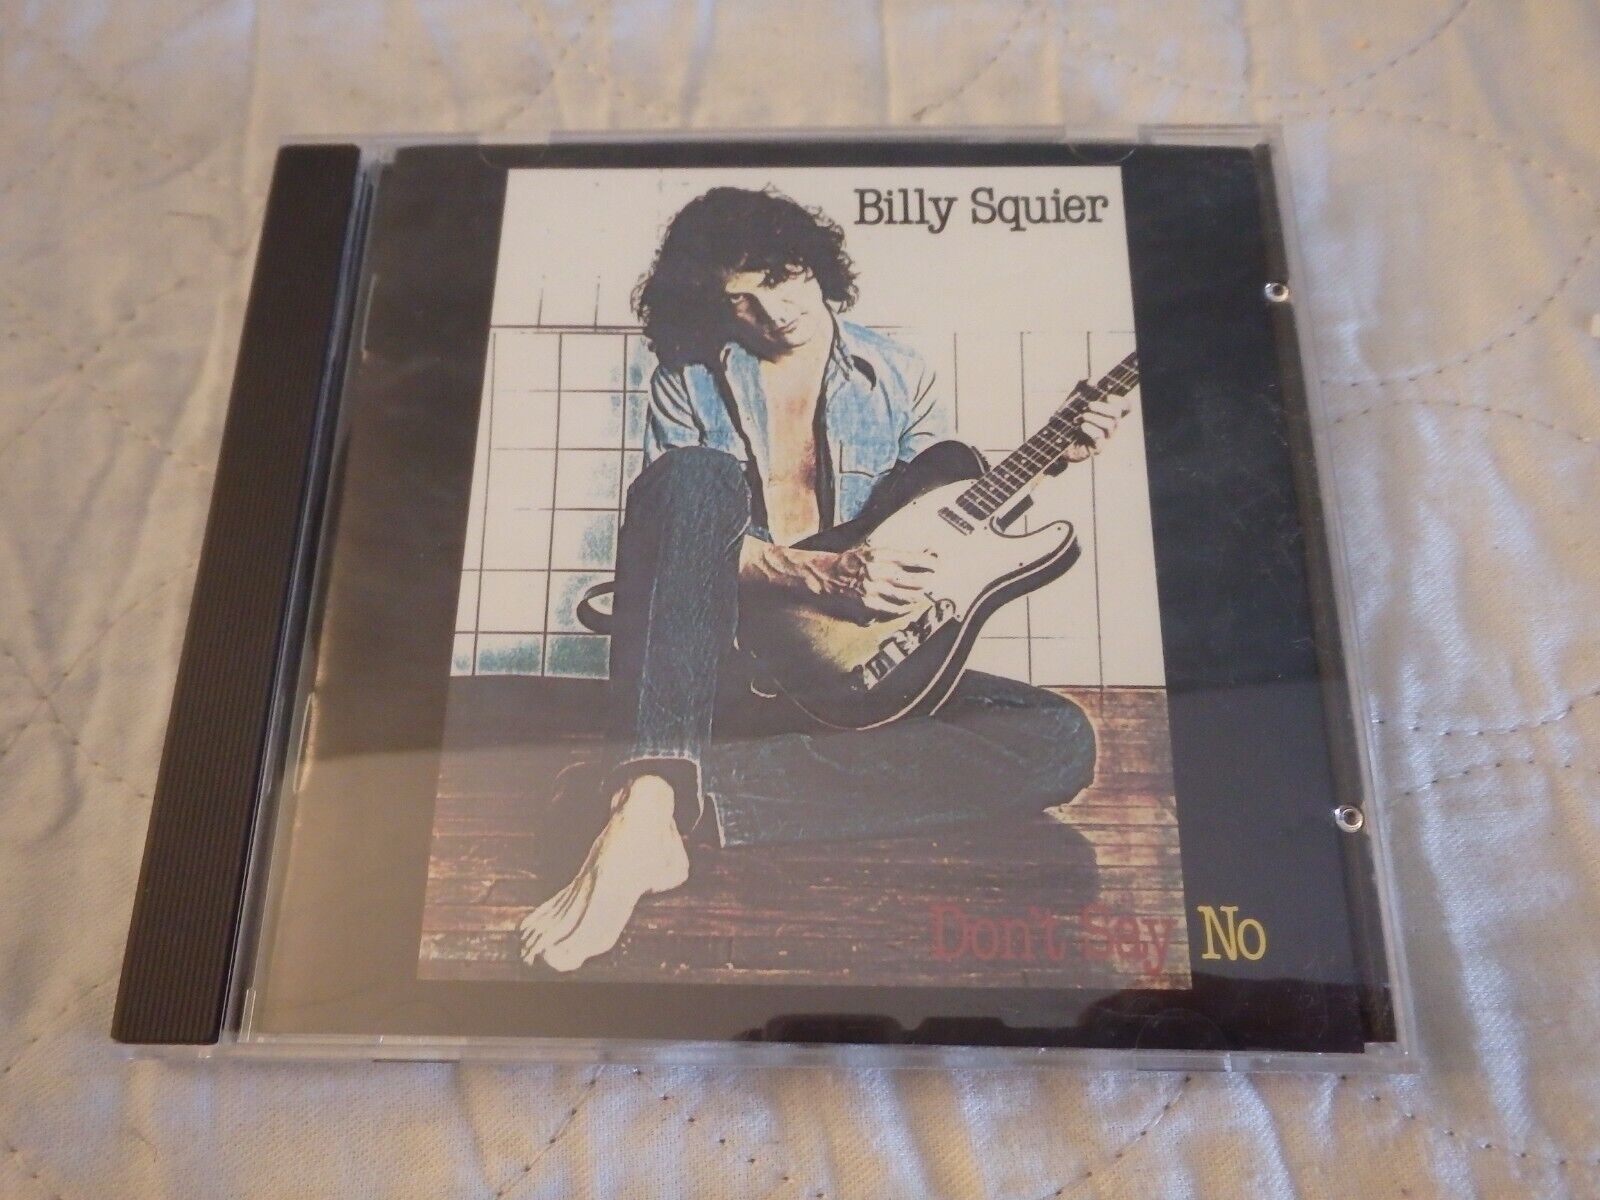 Billy Squier: Don't Say No (CD, 1981, Capitol Records)